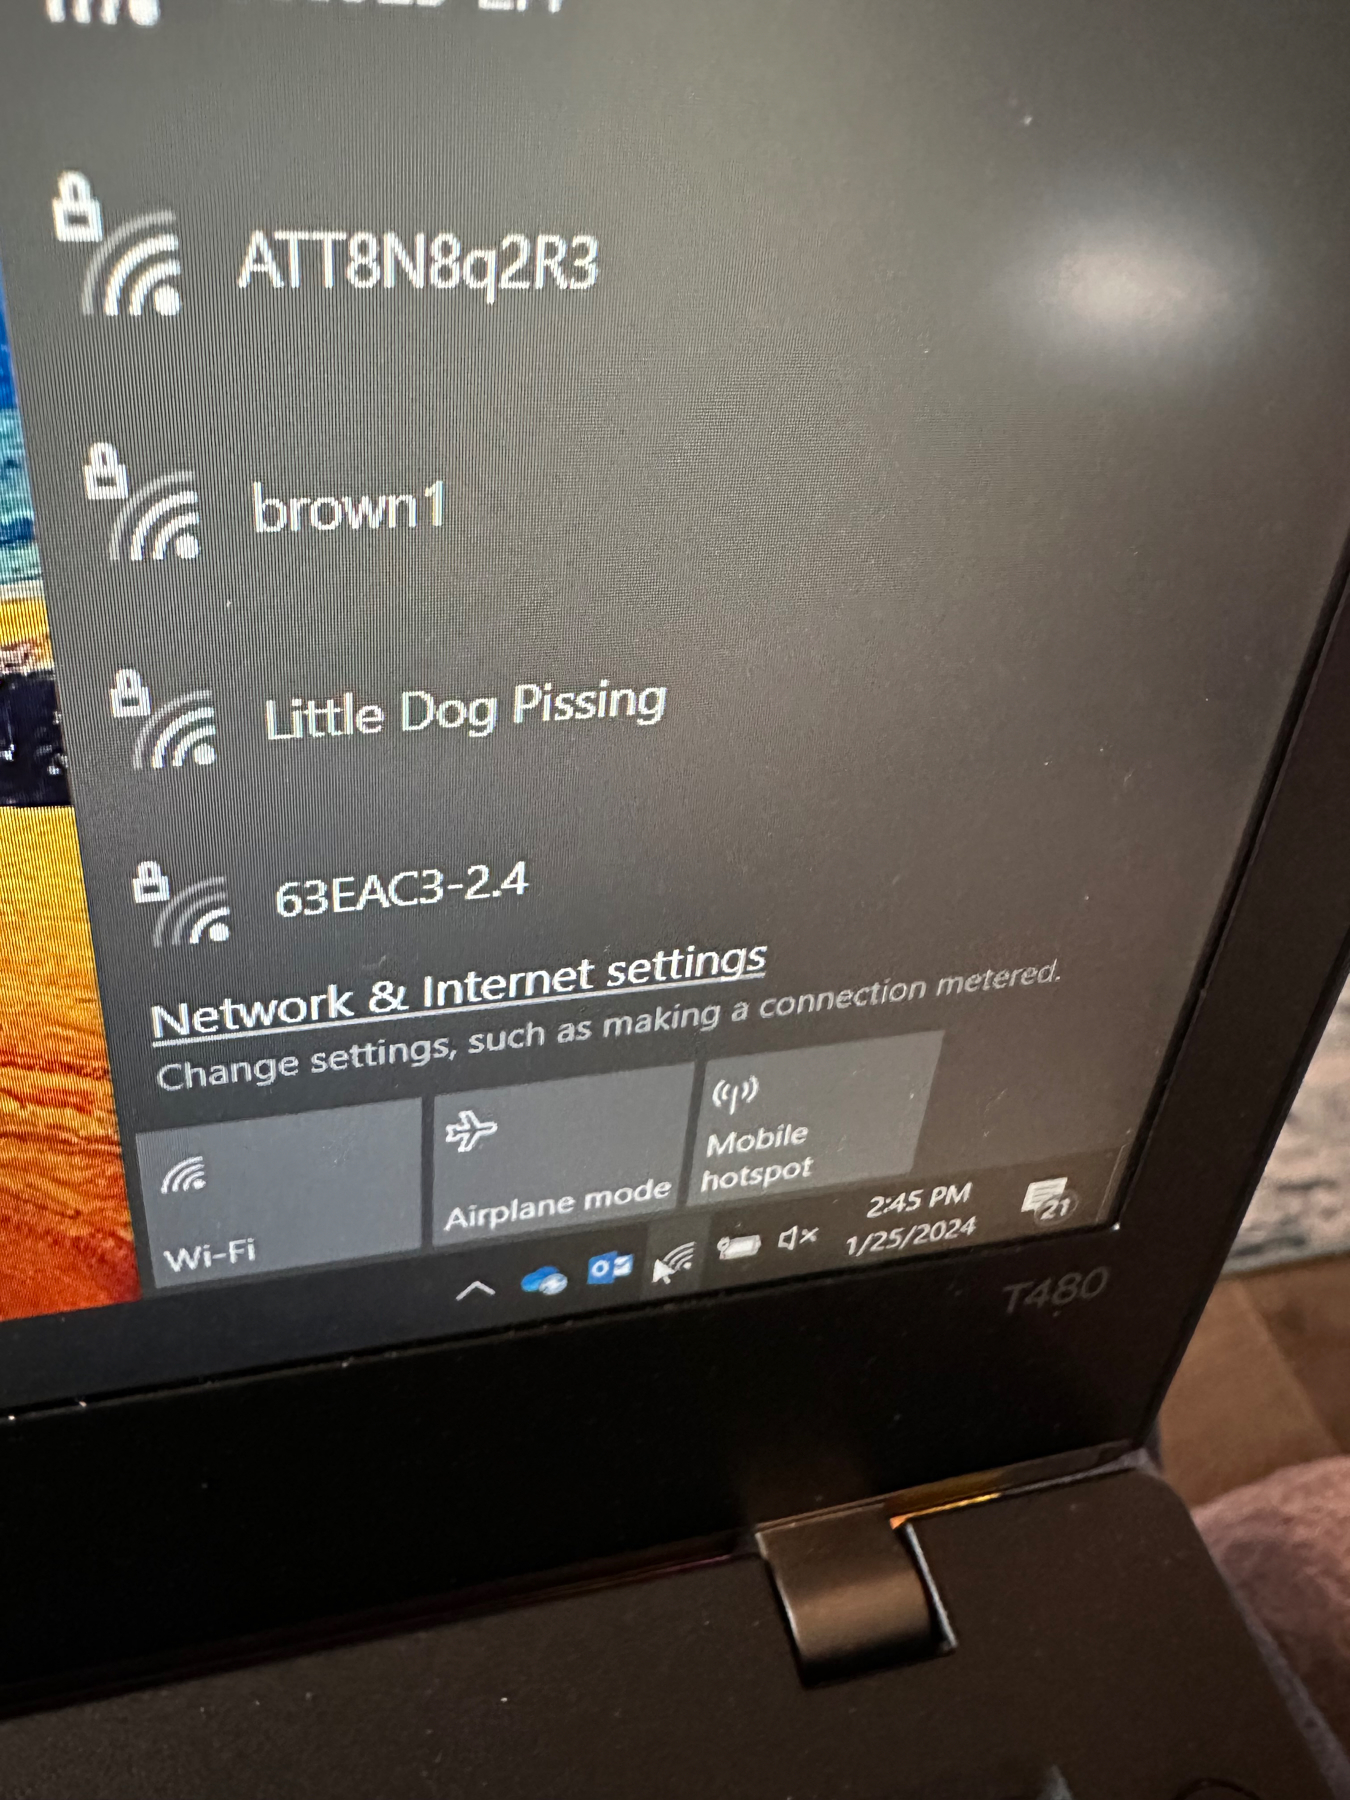 A laptop screen displaying a list of Wi-Fi network names with one highlighted as ‘Little Dog Pissing.’ Also visible are icons for Wi-Fi, Airplane mode, and Mobile hotspot, along with the time ‘2:45 PM’ and the date